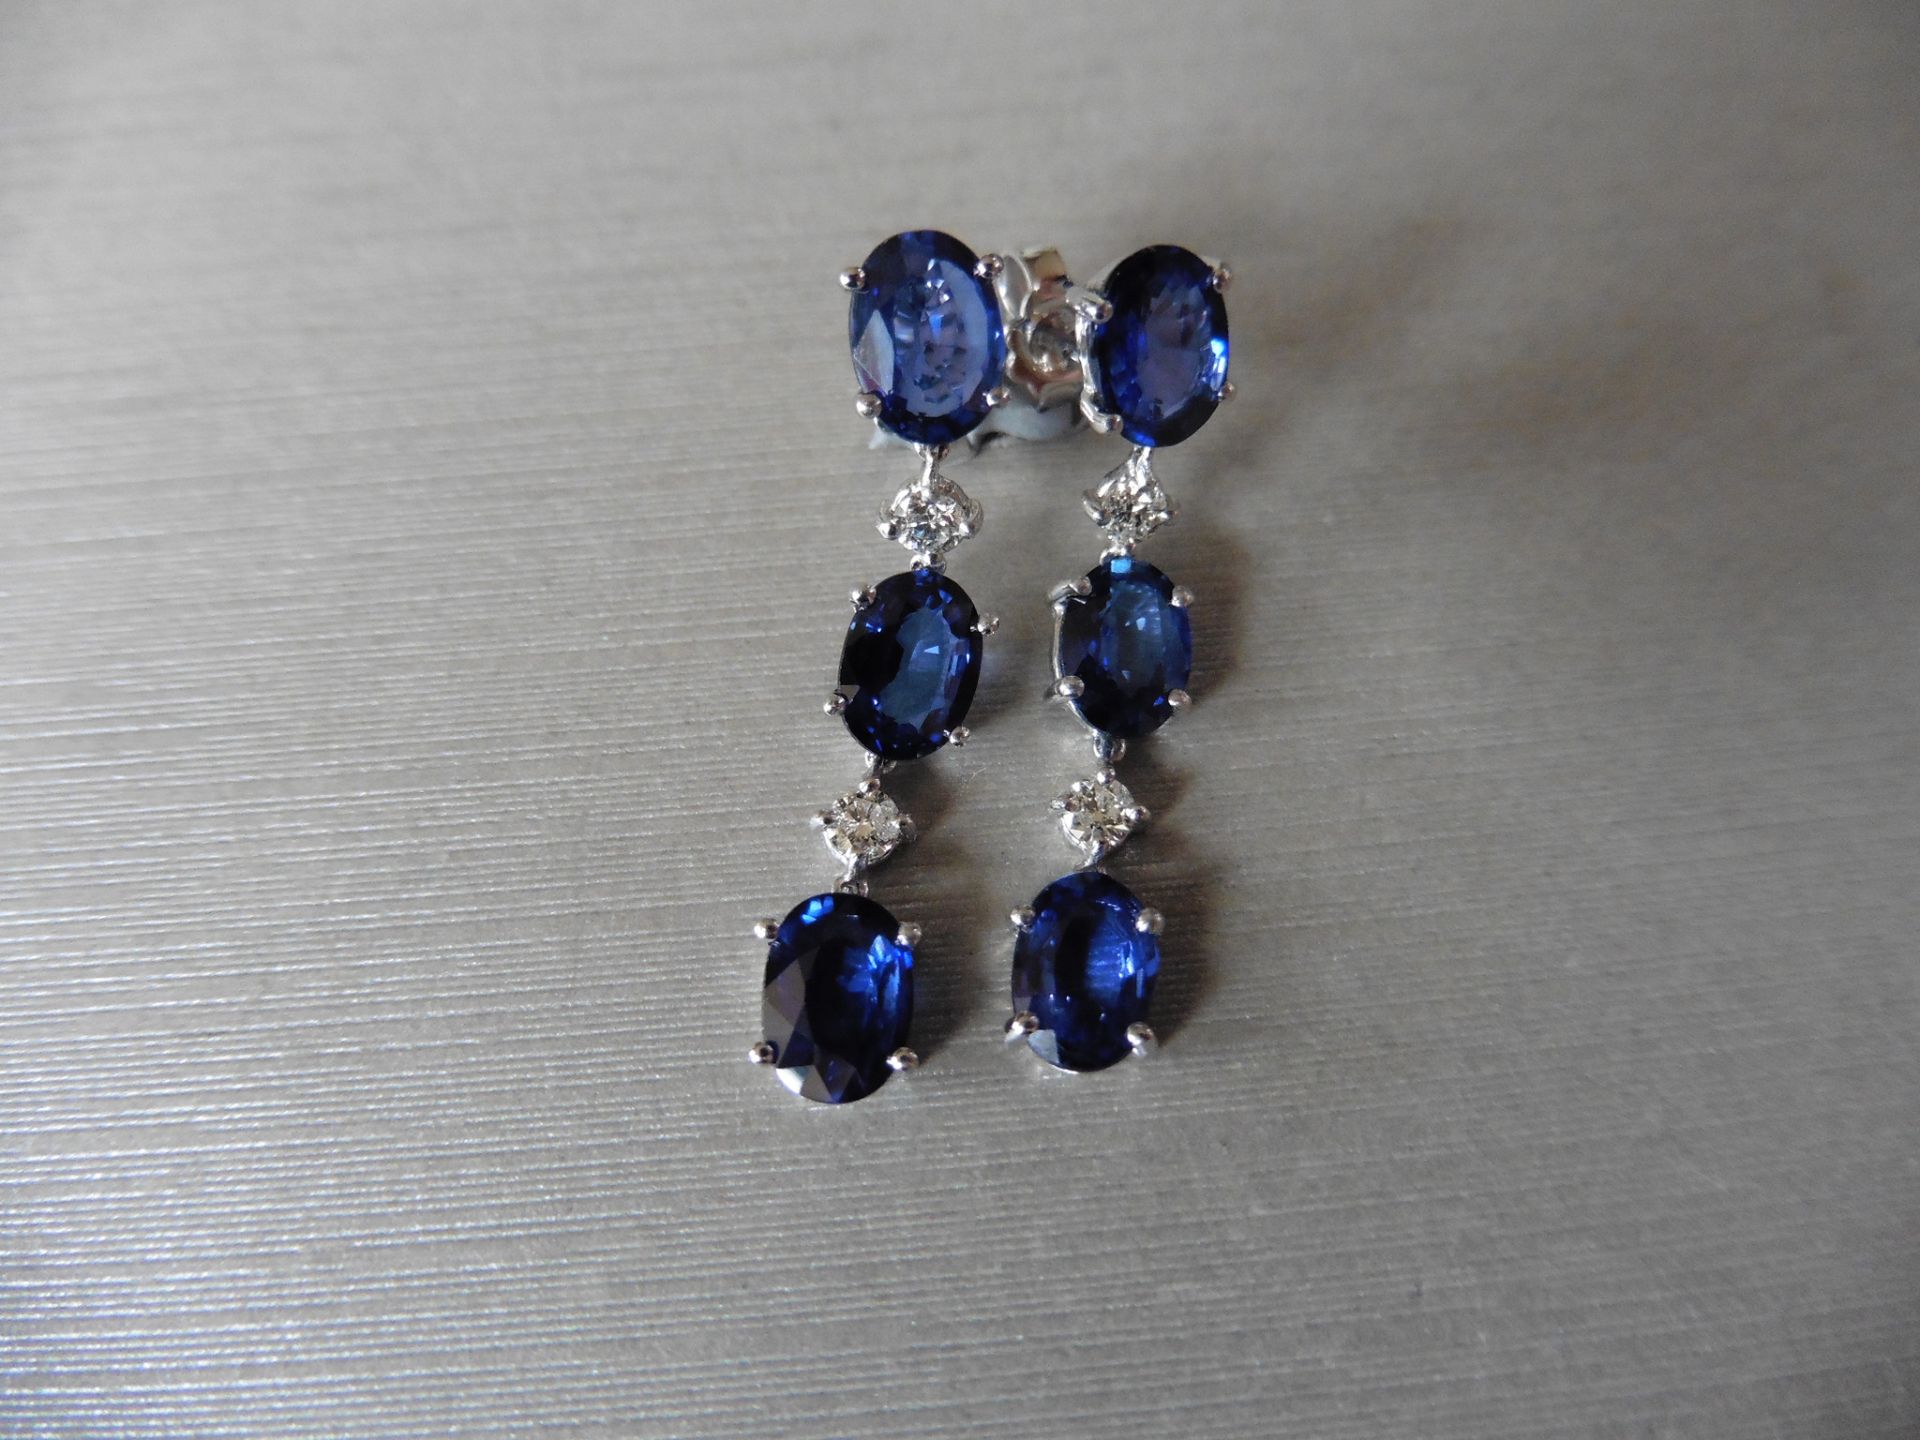 4.80ct sapphire and 0.12ct diamond drop earrings. Each set with 3 oval cut sapphires and 2 brilliant